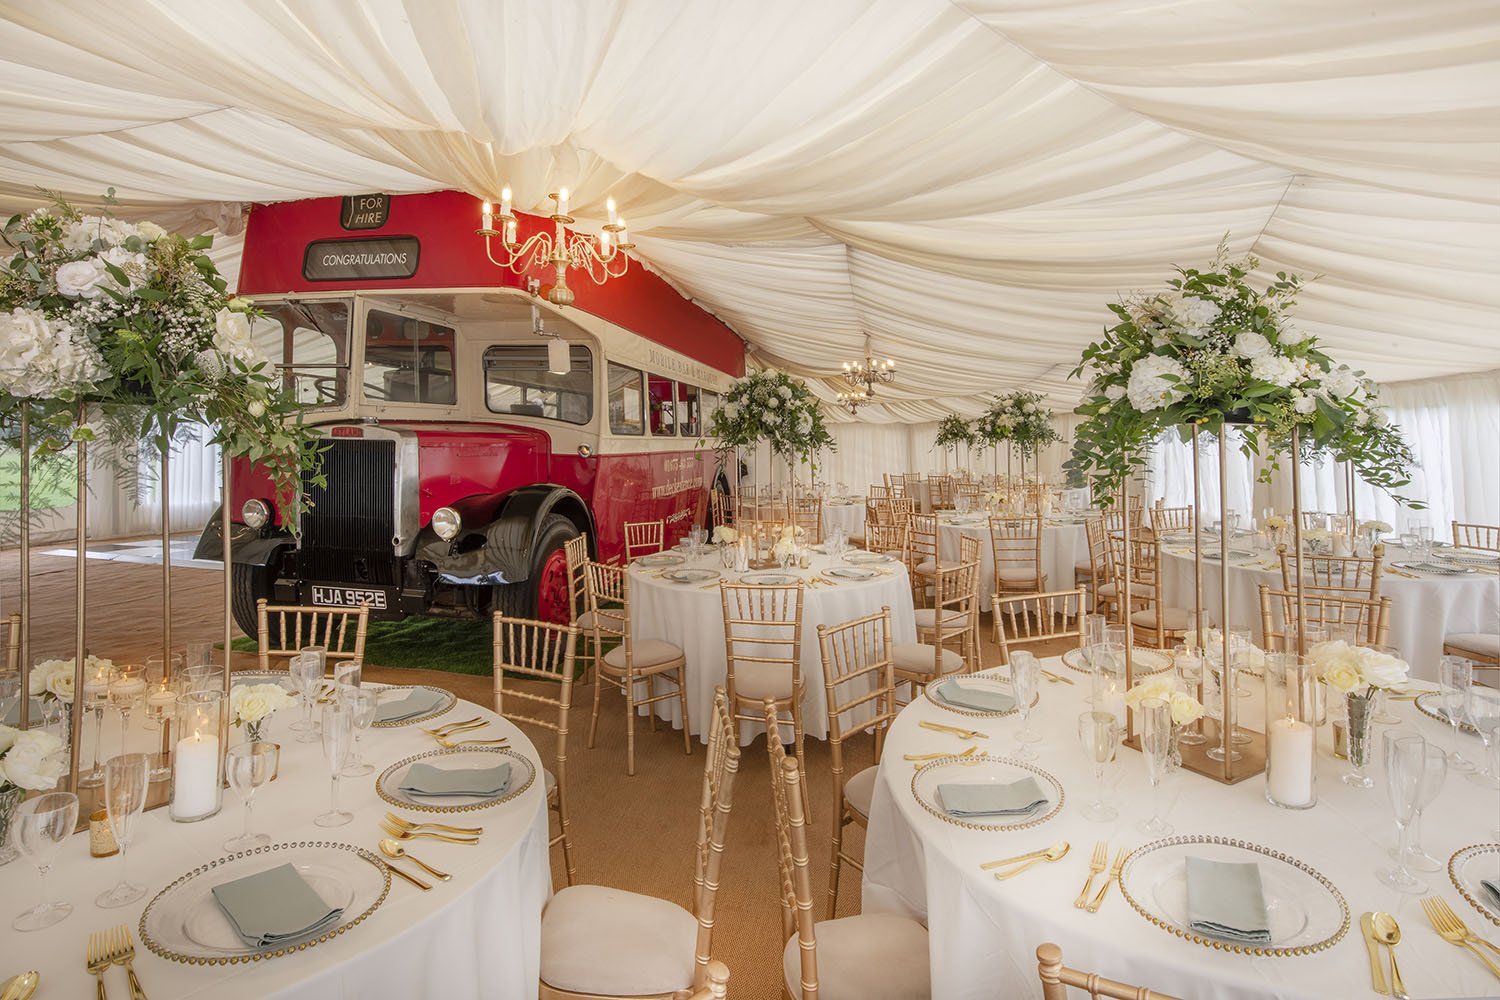  The vintage bus is a unique wedding venue and is a prominent feature surrounded by chairs and round tables laid for a wedding breakfast. There is cream fabric draped above to hide the ceiling of the marquee whilst the addition of wedding florals and